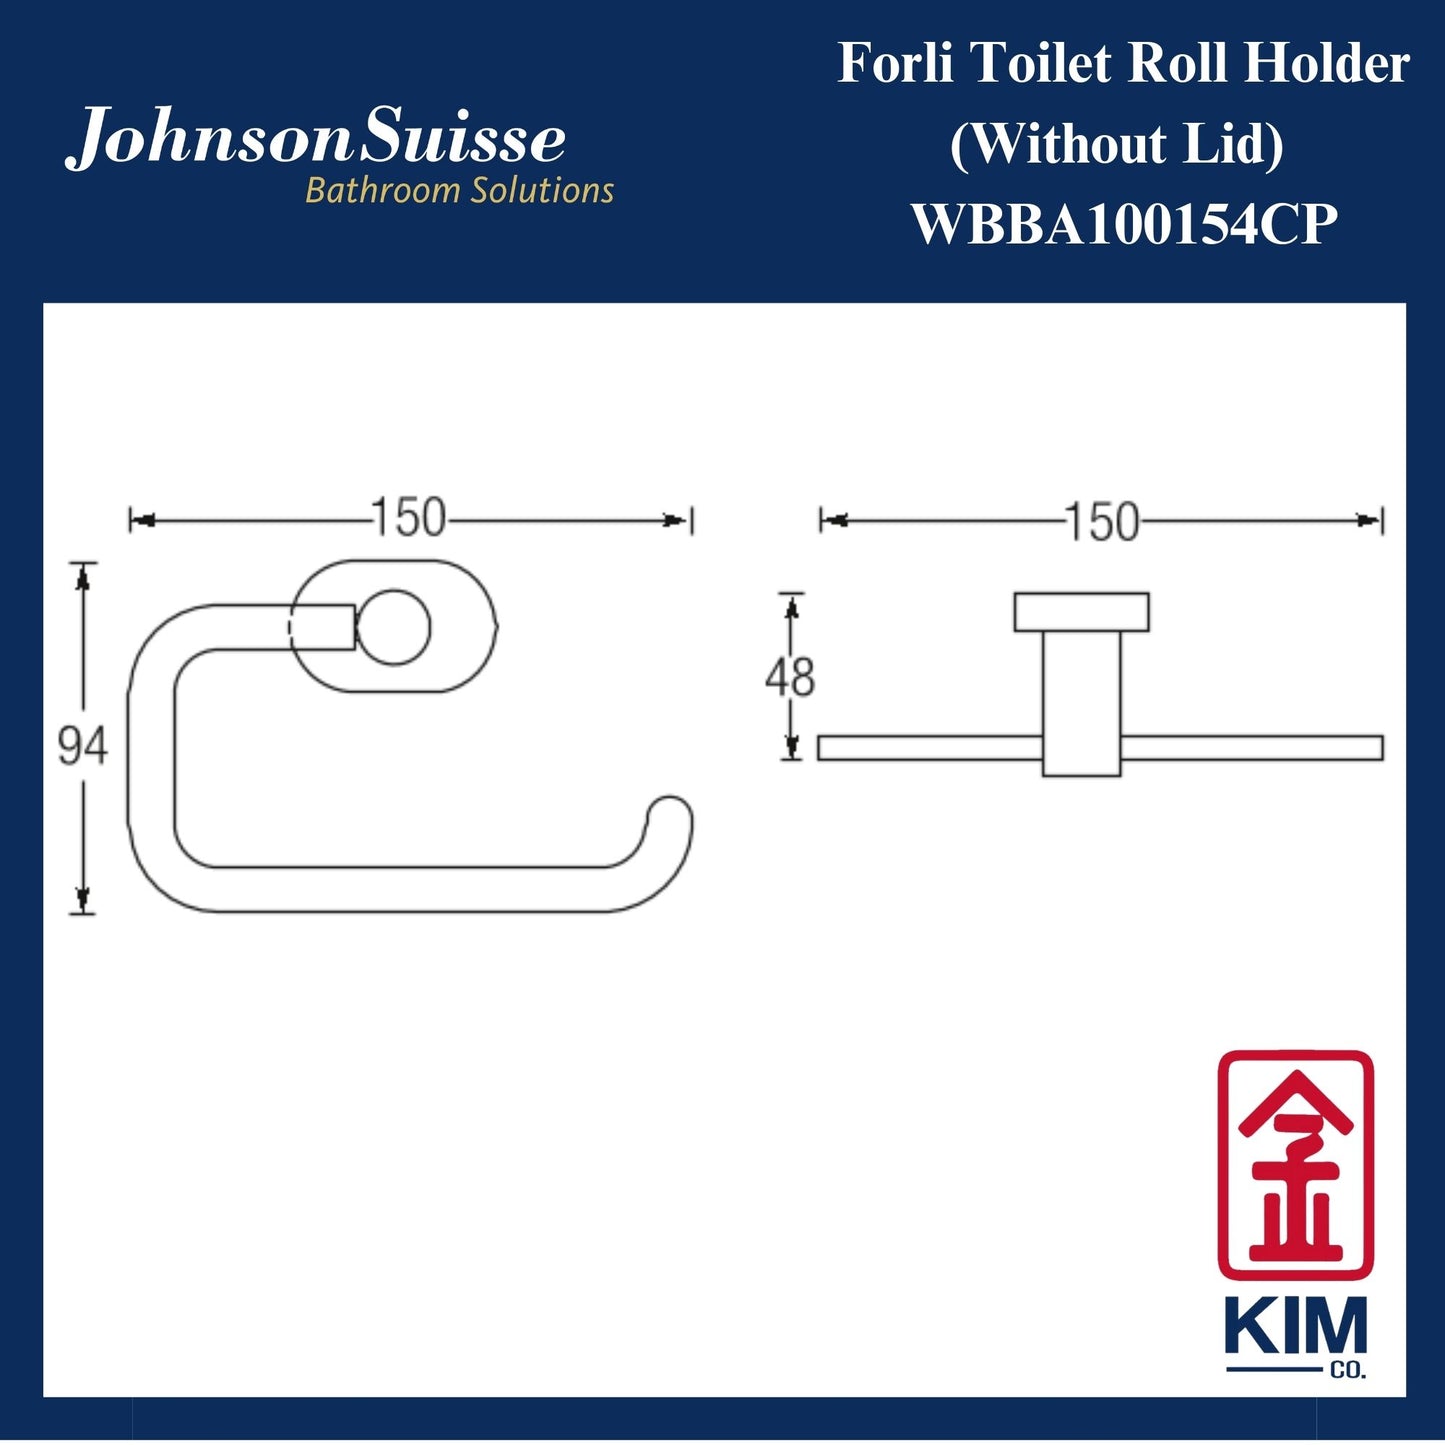 Johnson Suisse Forli Toilet Roll Holder Without Lid (WBBA100154CP)